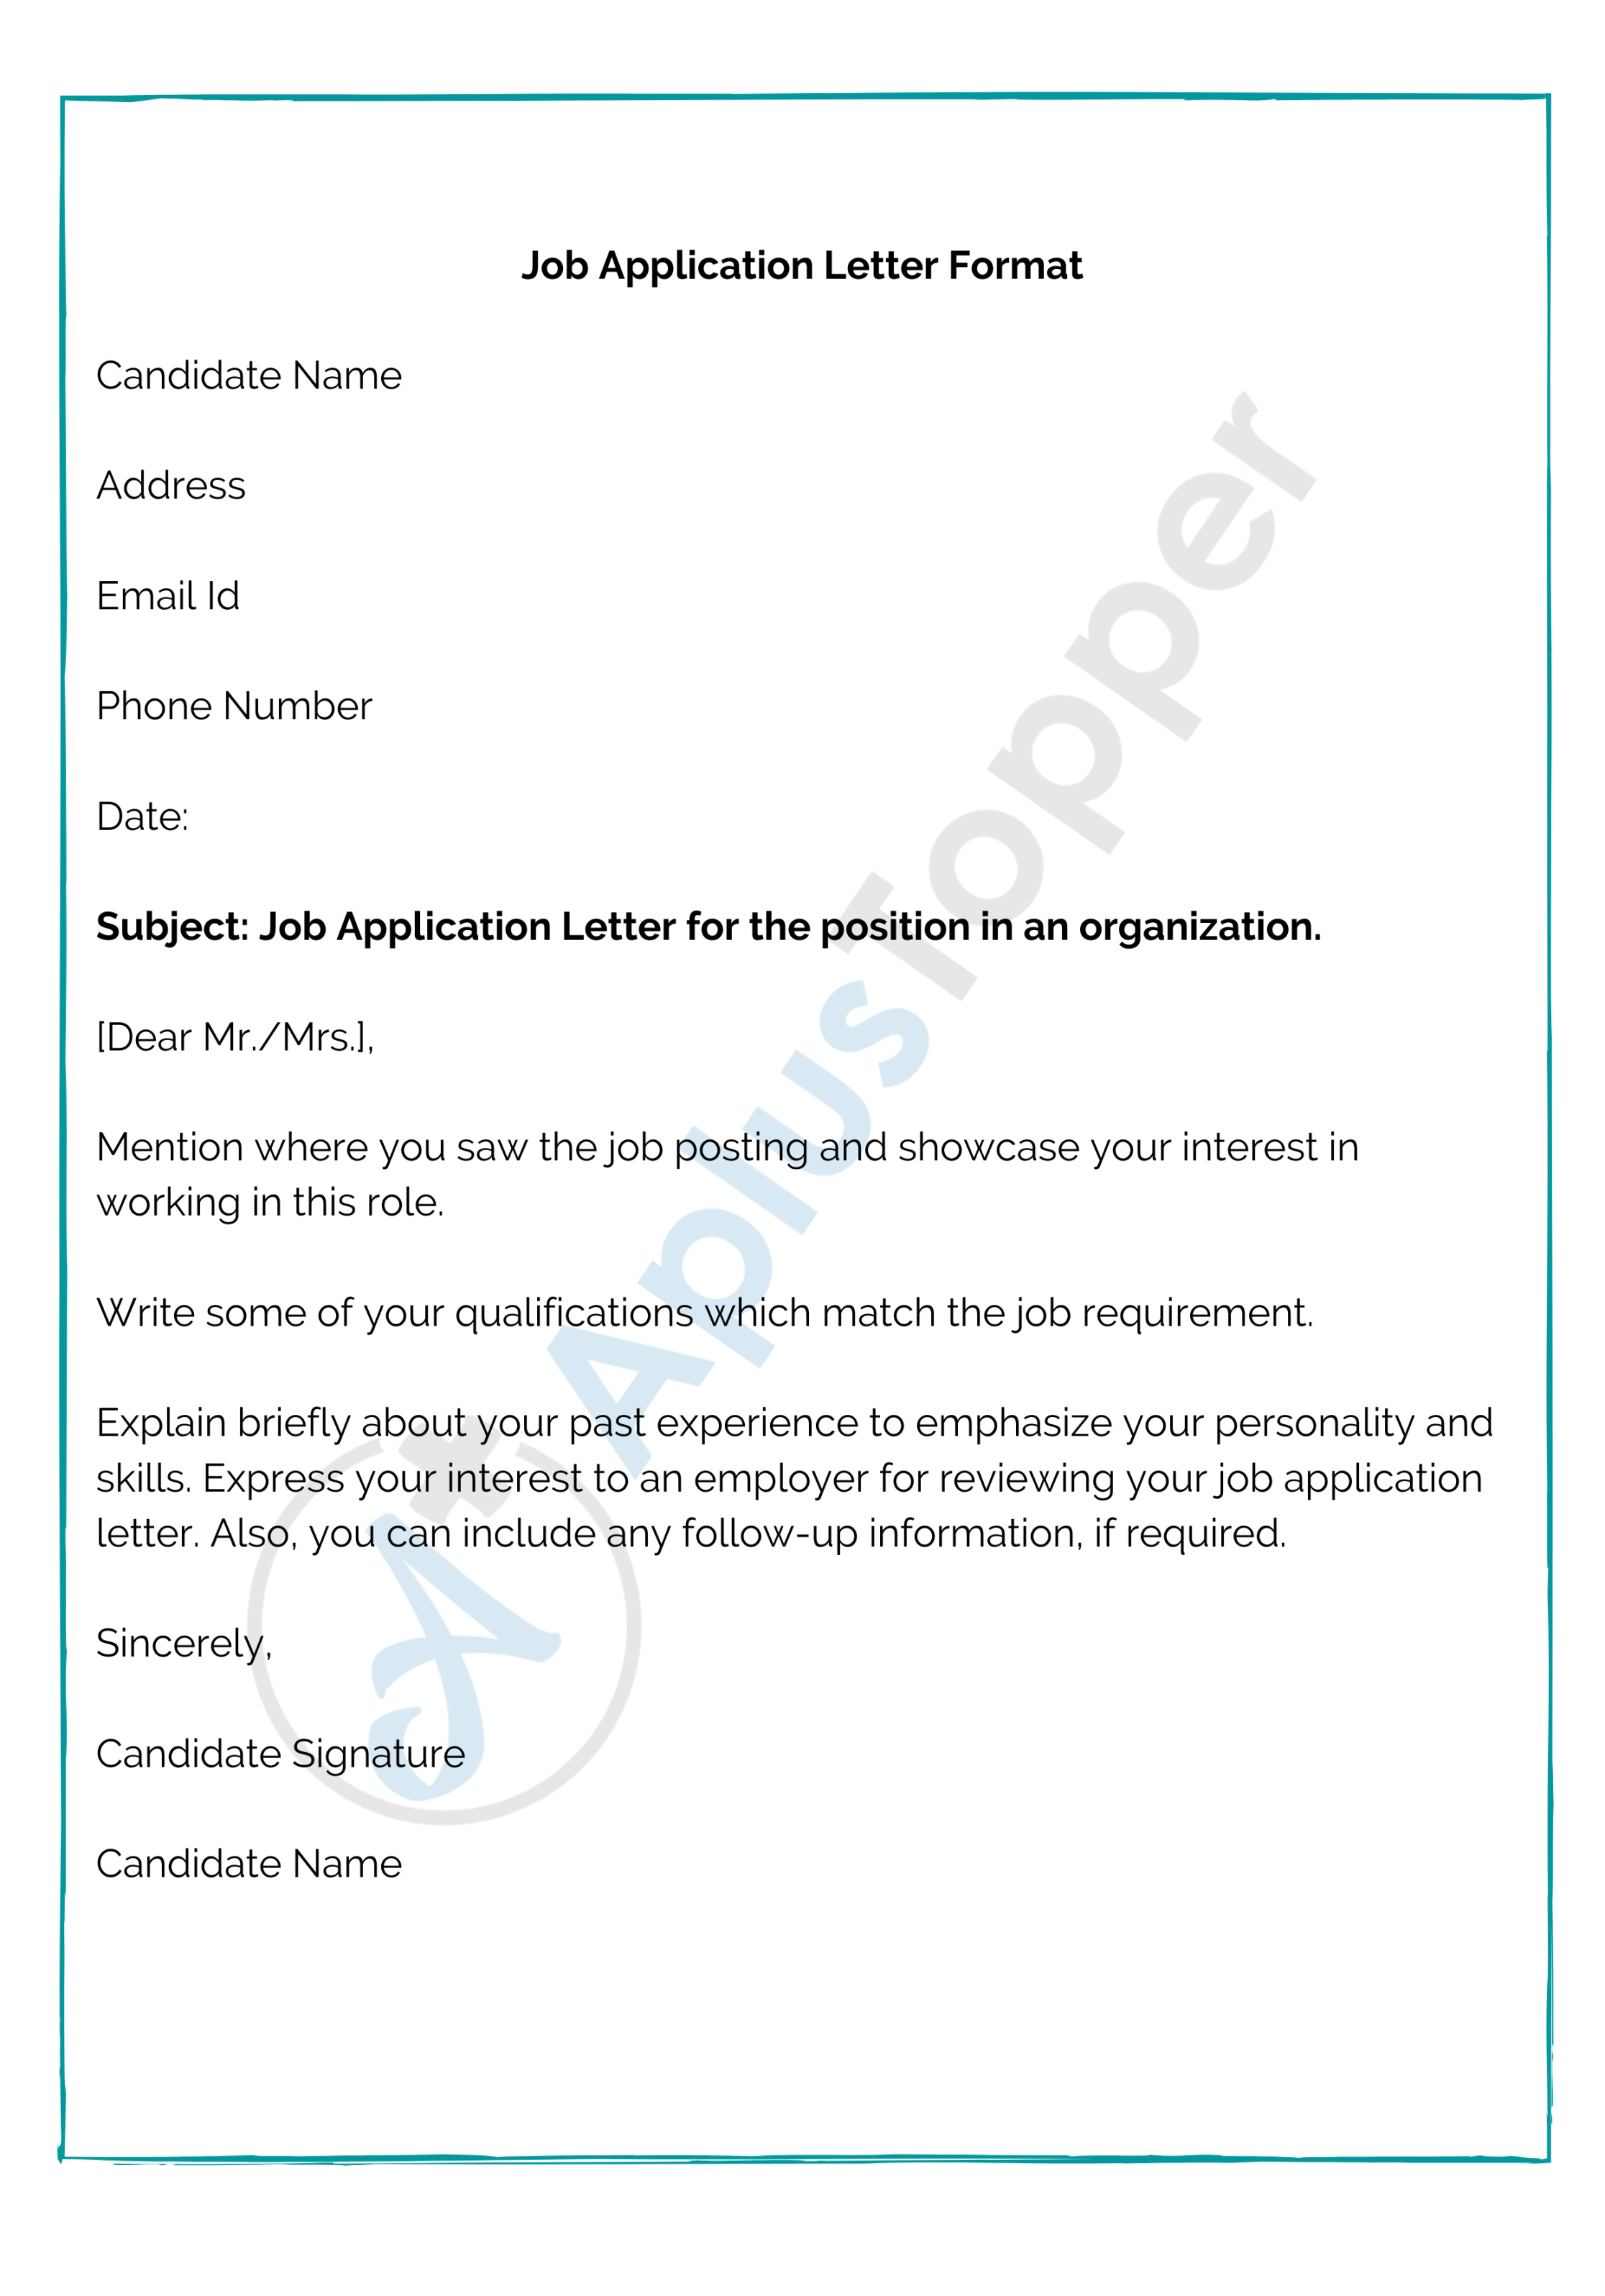 job application letter format samples how to write a job 0